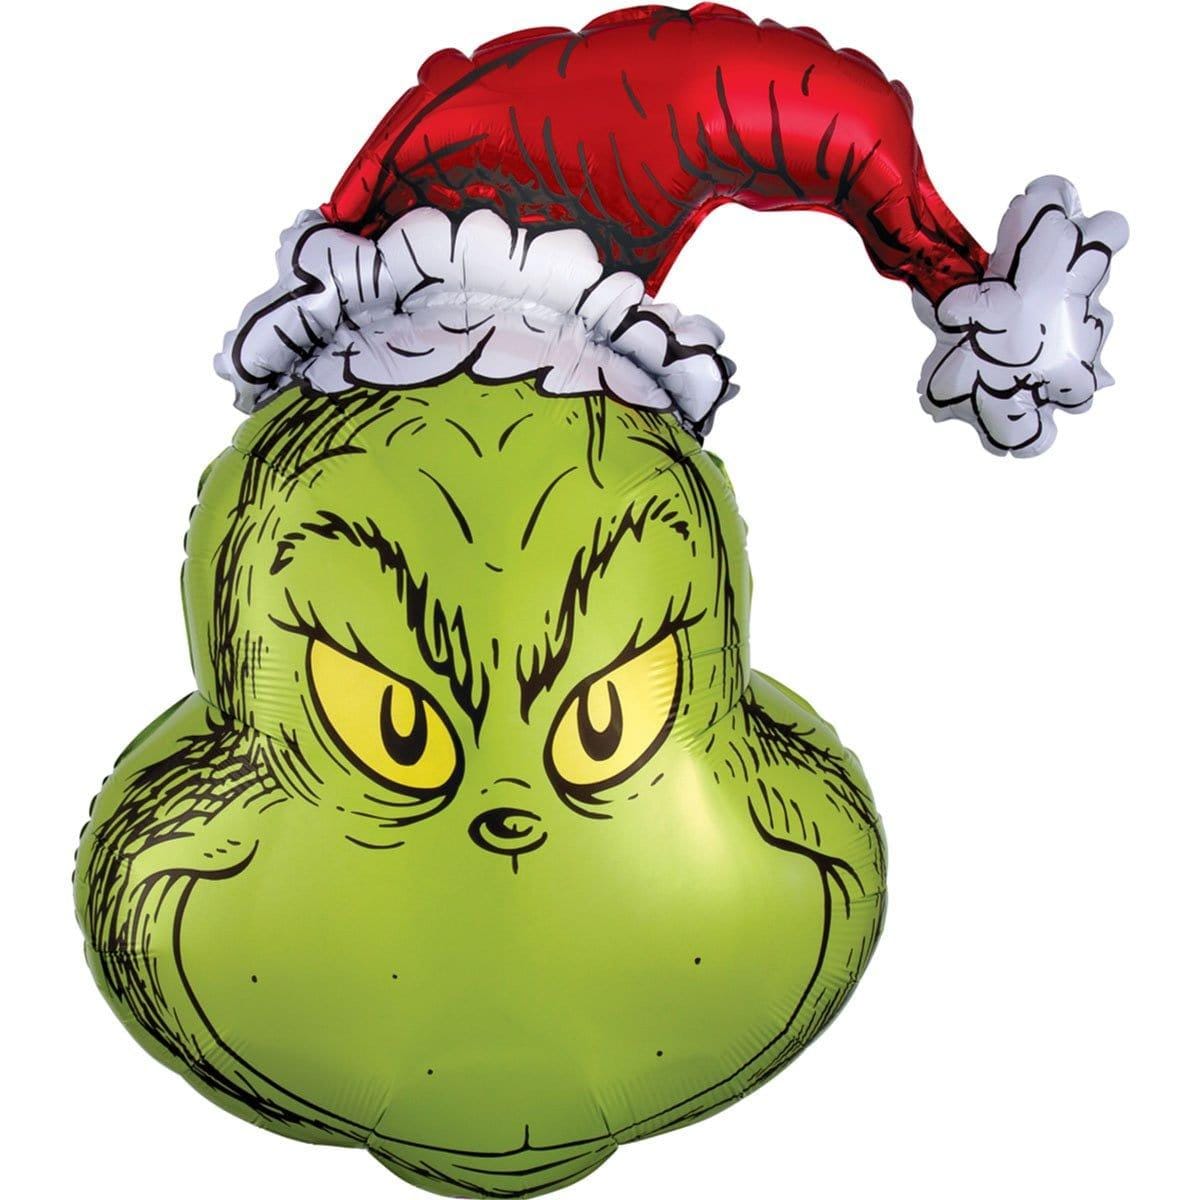 Buy Balloons How the Grinch Stole Christmas Supershape Balloon sold at Party Expert